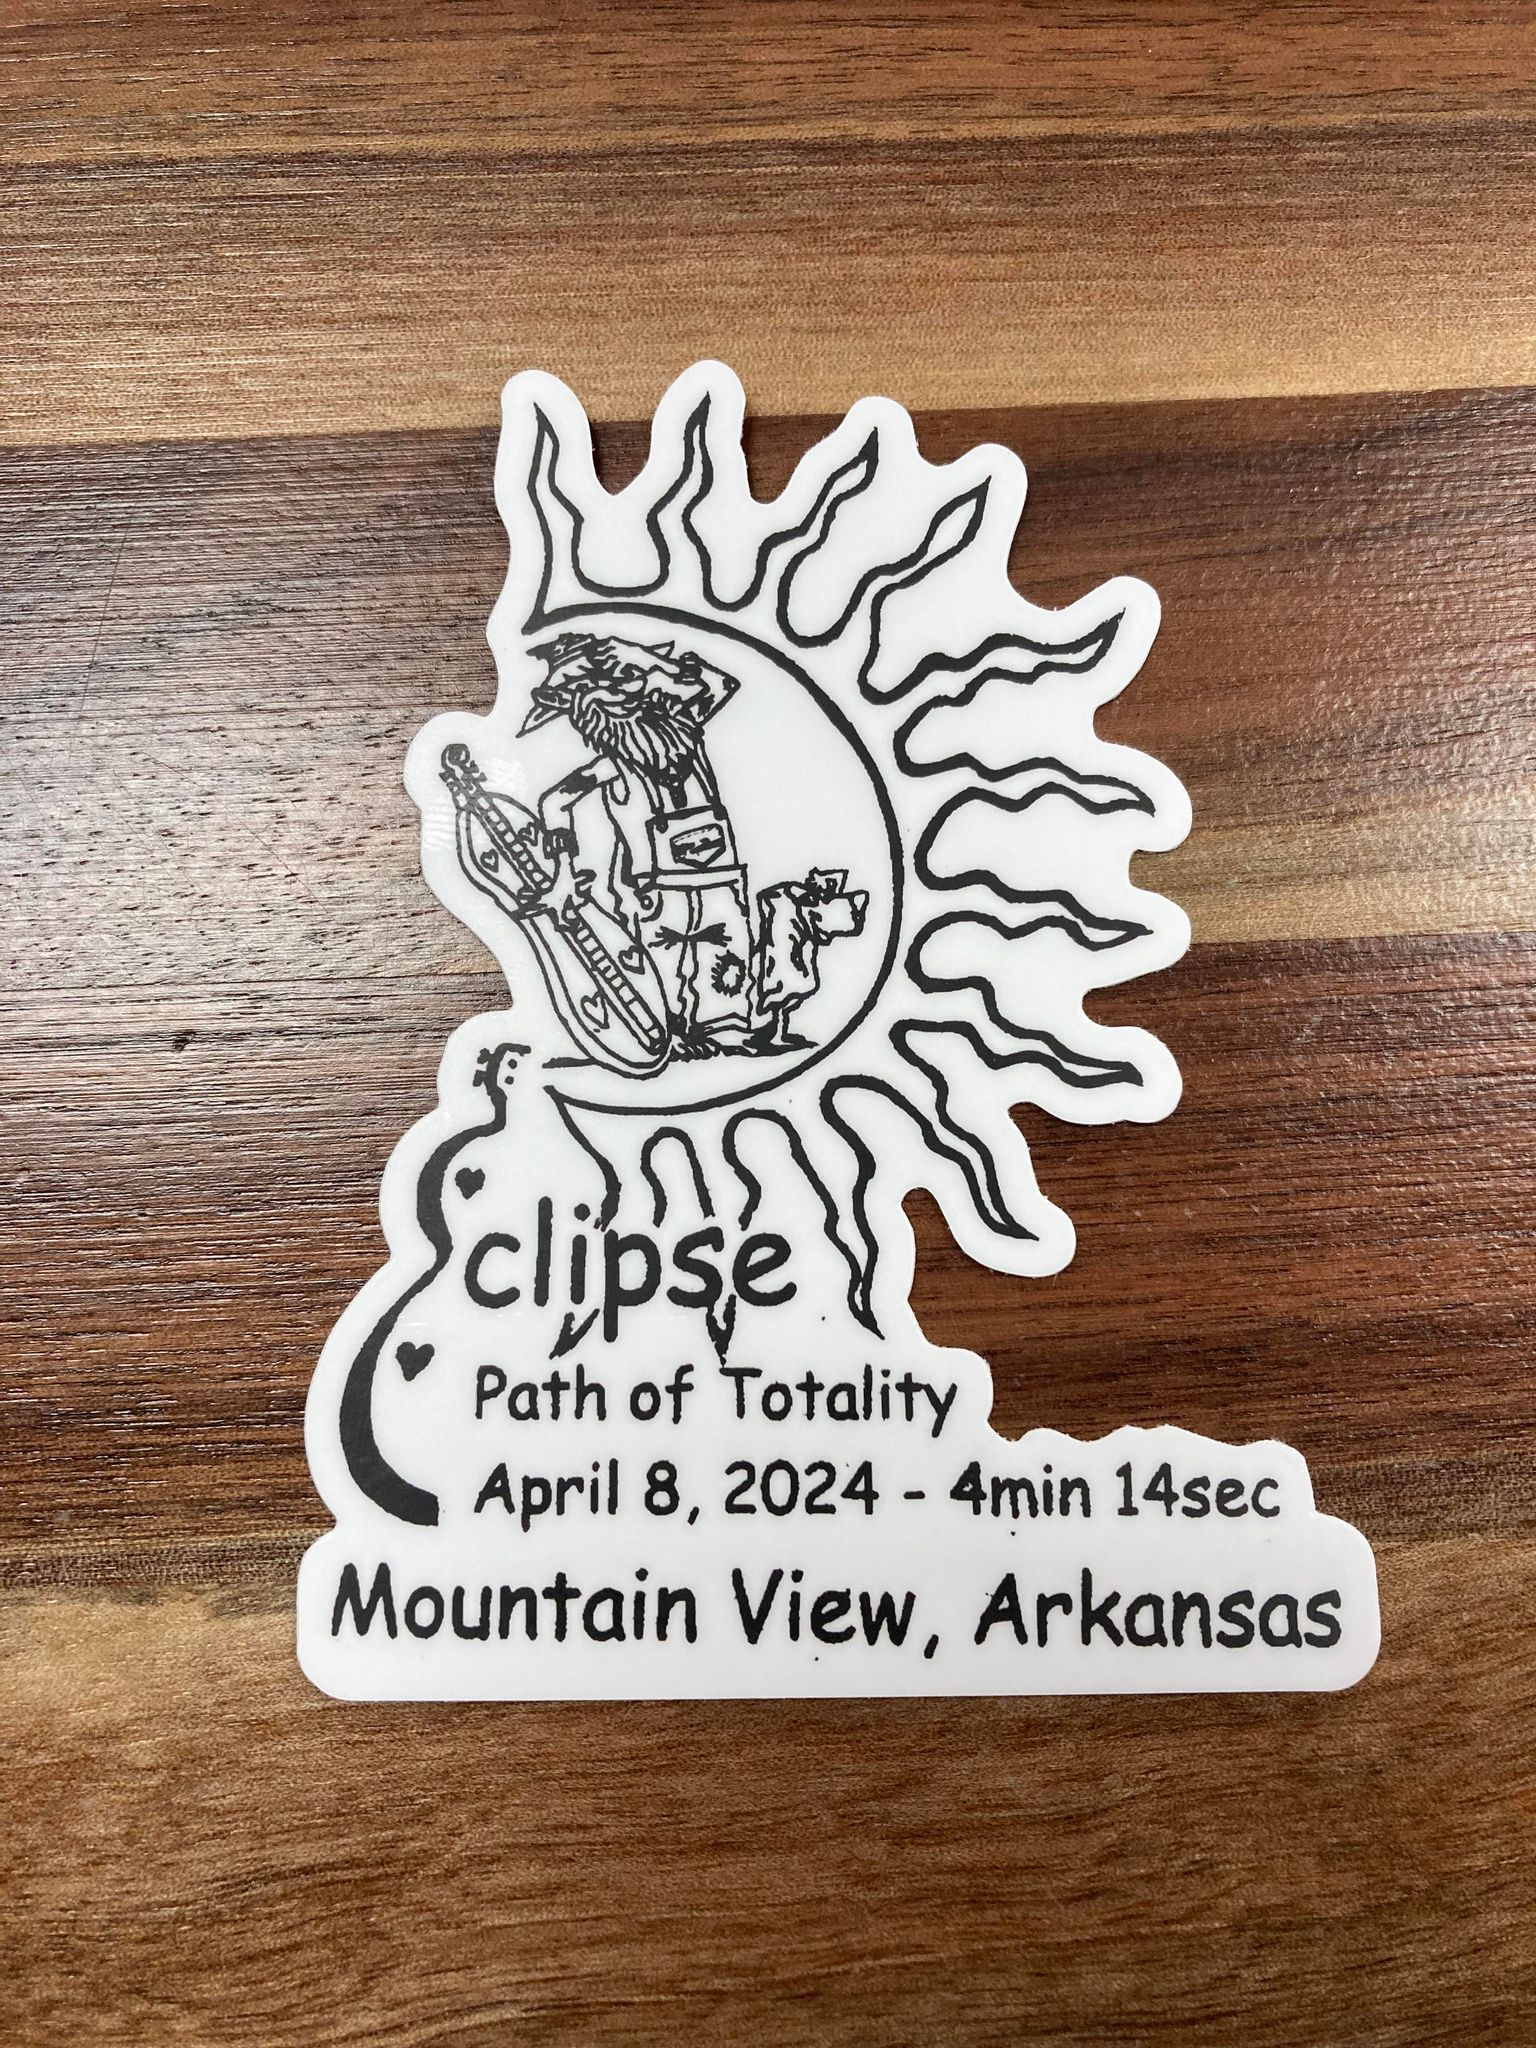 A commemorative McSpadden sticker, perfect for decorating laptops, depicting the solar eclipse event on April 8, 2024, with Mountain View, Arkansas as the location of observation, highlighting the duration of tot